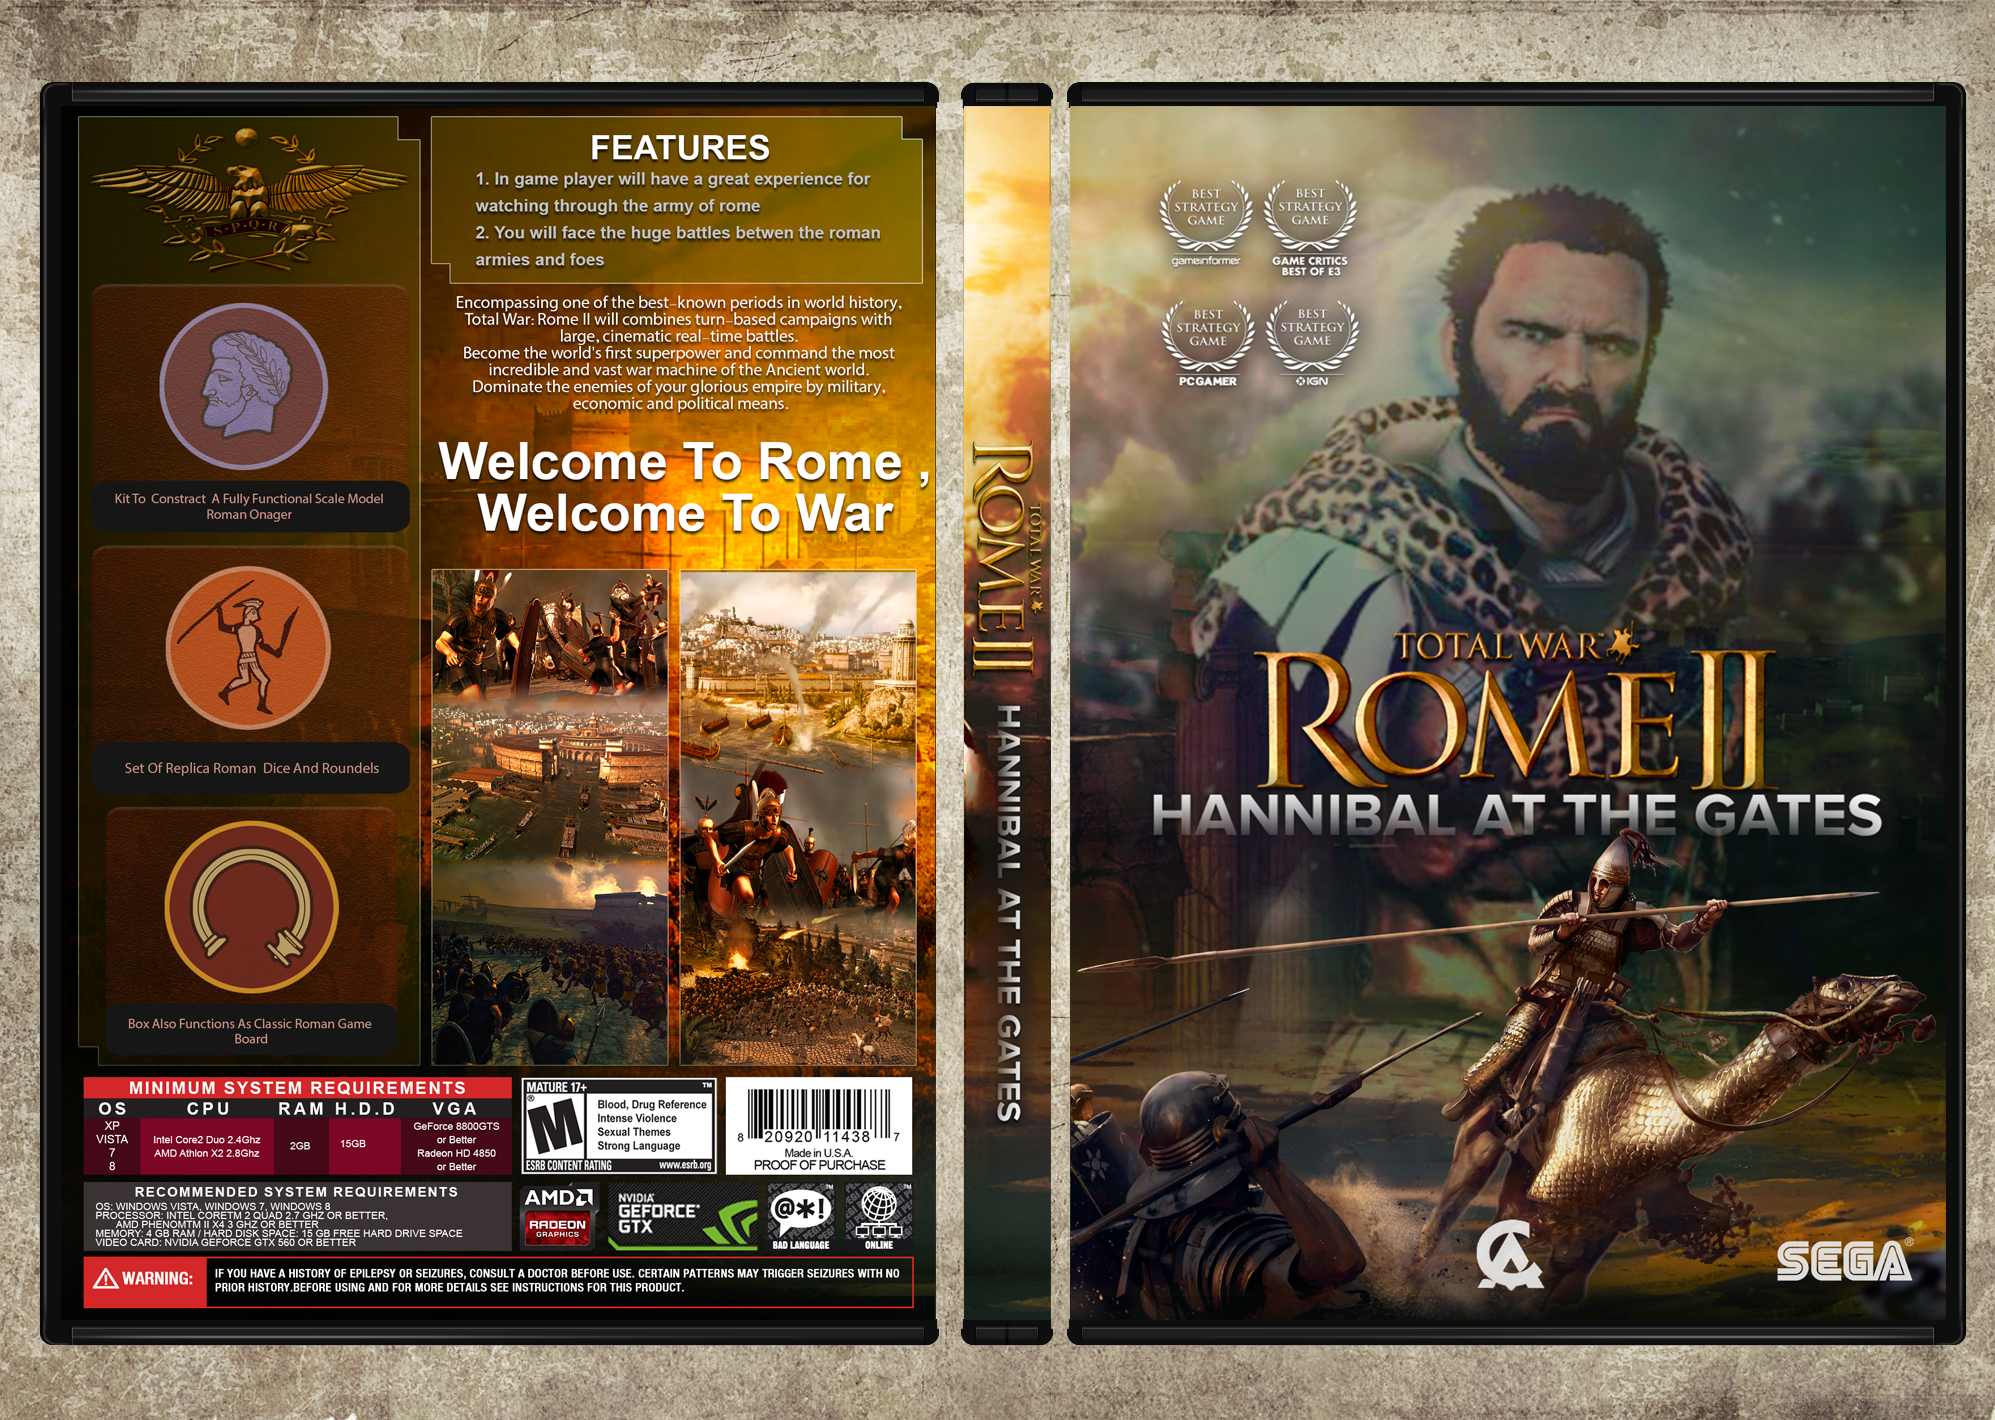 Total War Rome II Hannibal at the Gates box cover